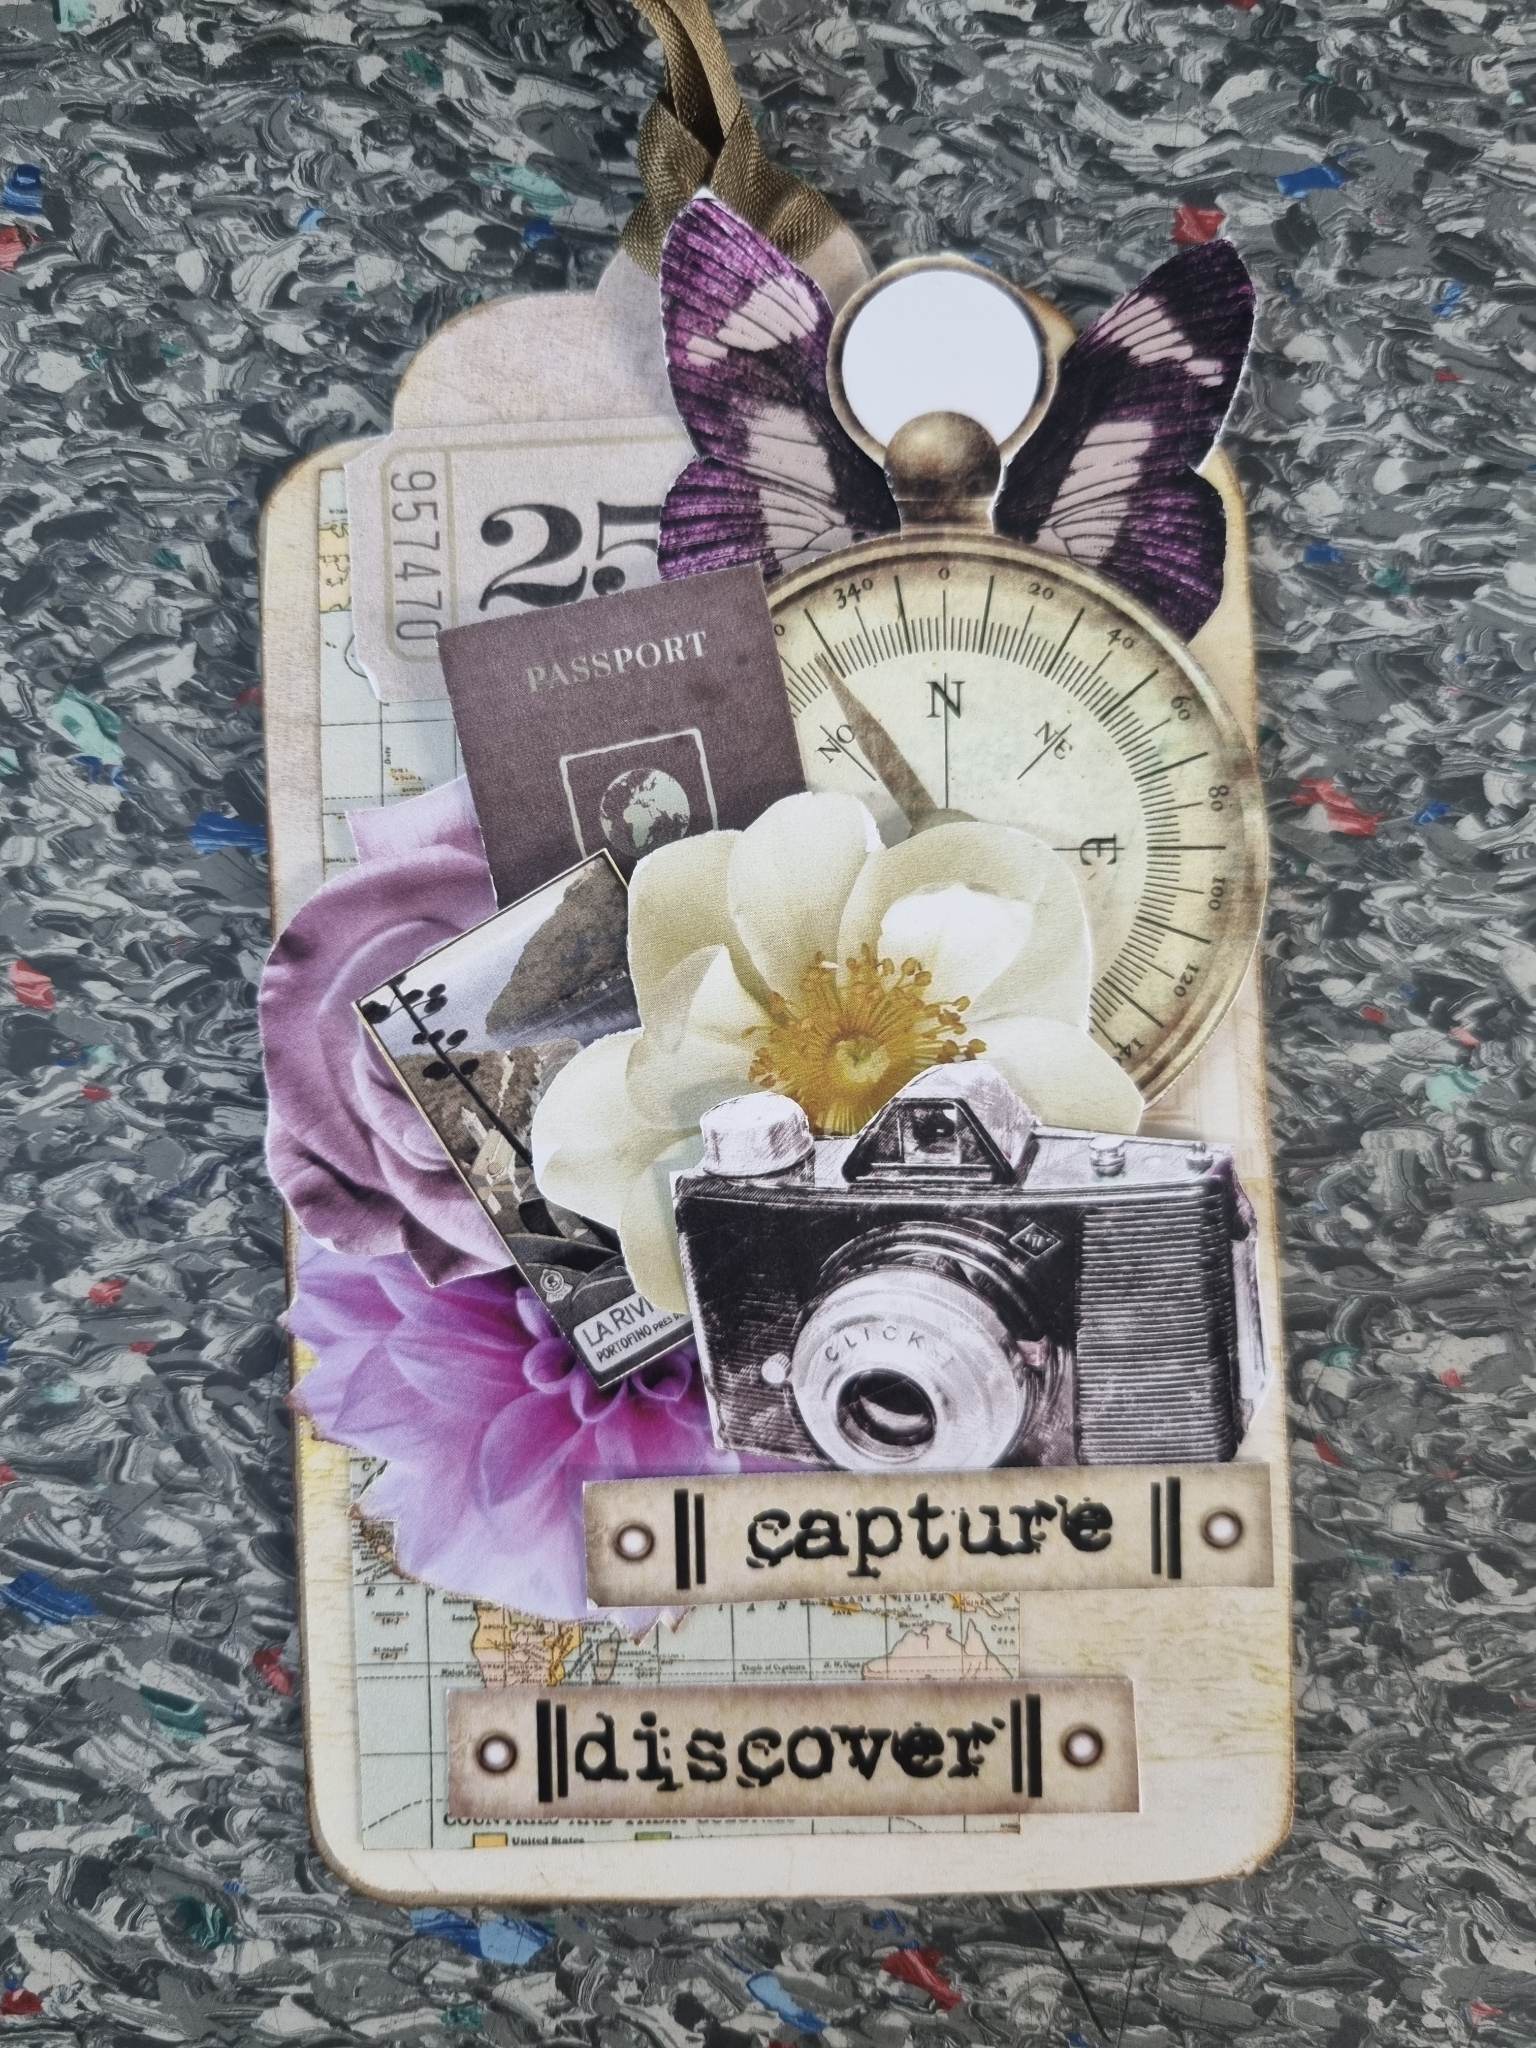 Junk Journal: Blank Book for Scrapbooking and Collecting Ephemera,  Stickers, Stamps, Pressed Flowers and Found Papers | Retro Vintage Design  and Cream